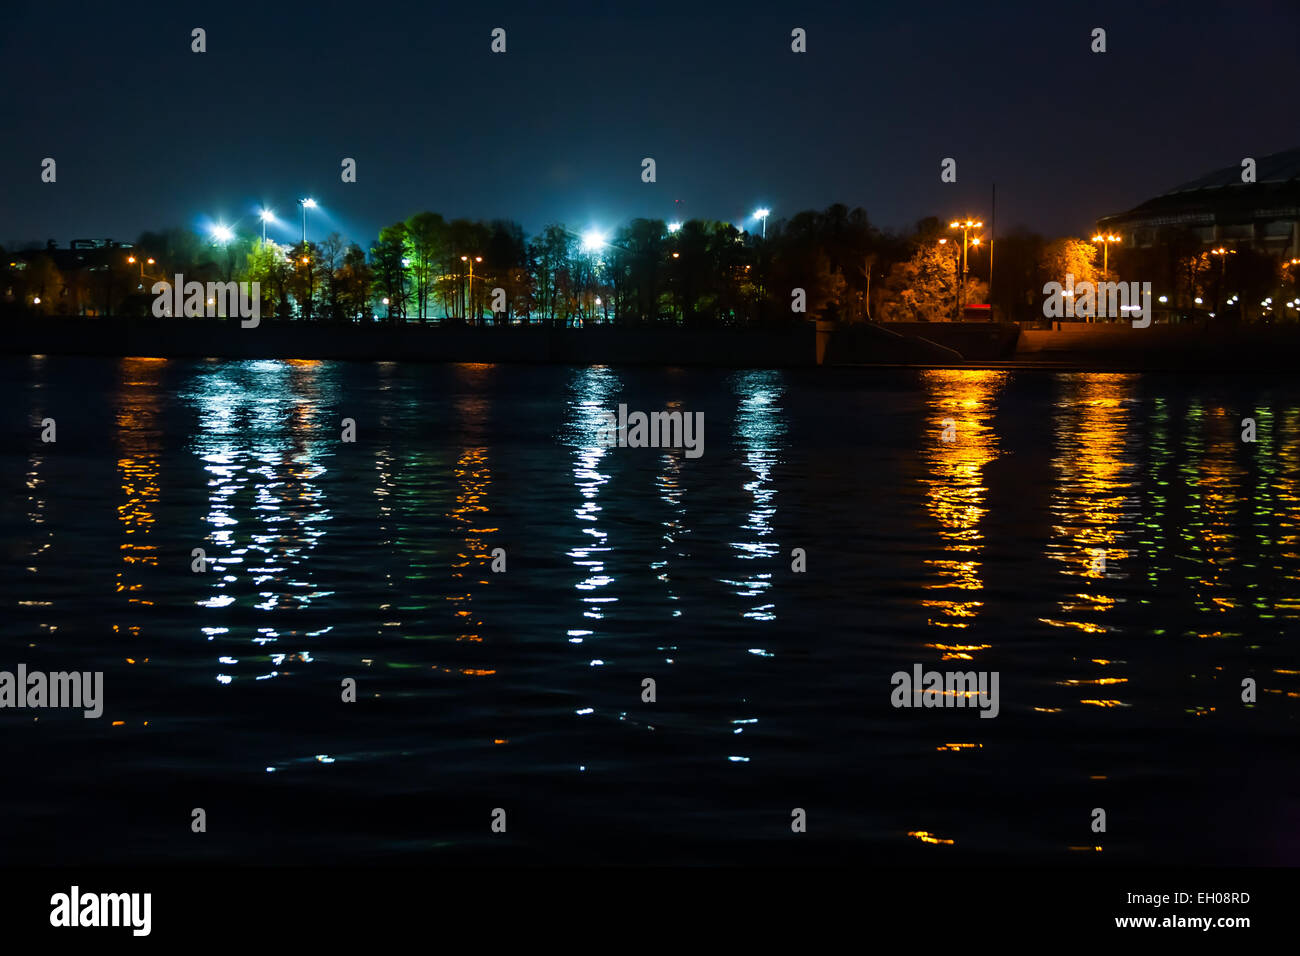 multi colored reflection of lamps in the night river Stock Photo